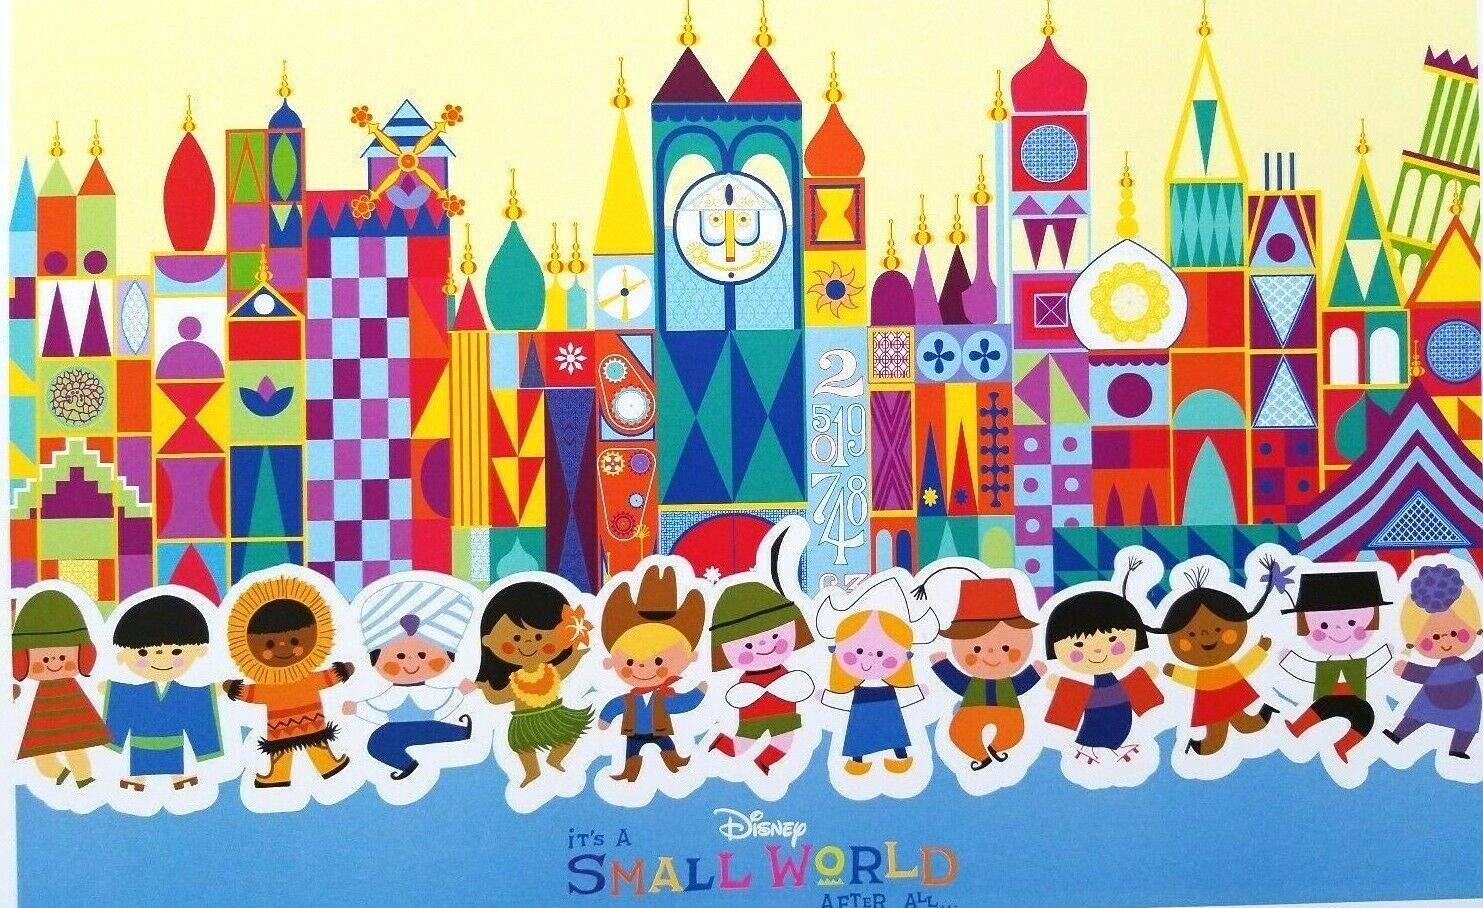 It's A Small World Mary Blair Art Poster Print 11x17 